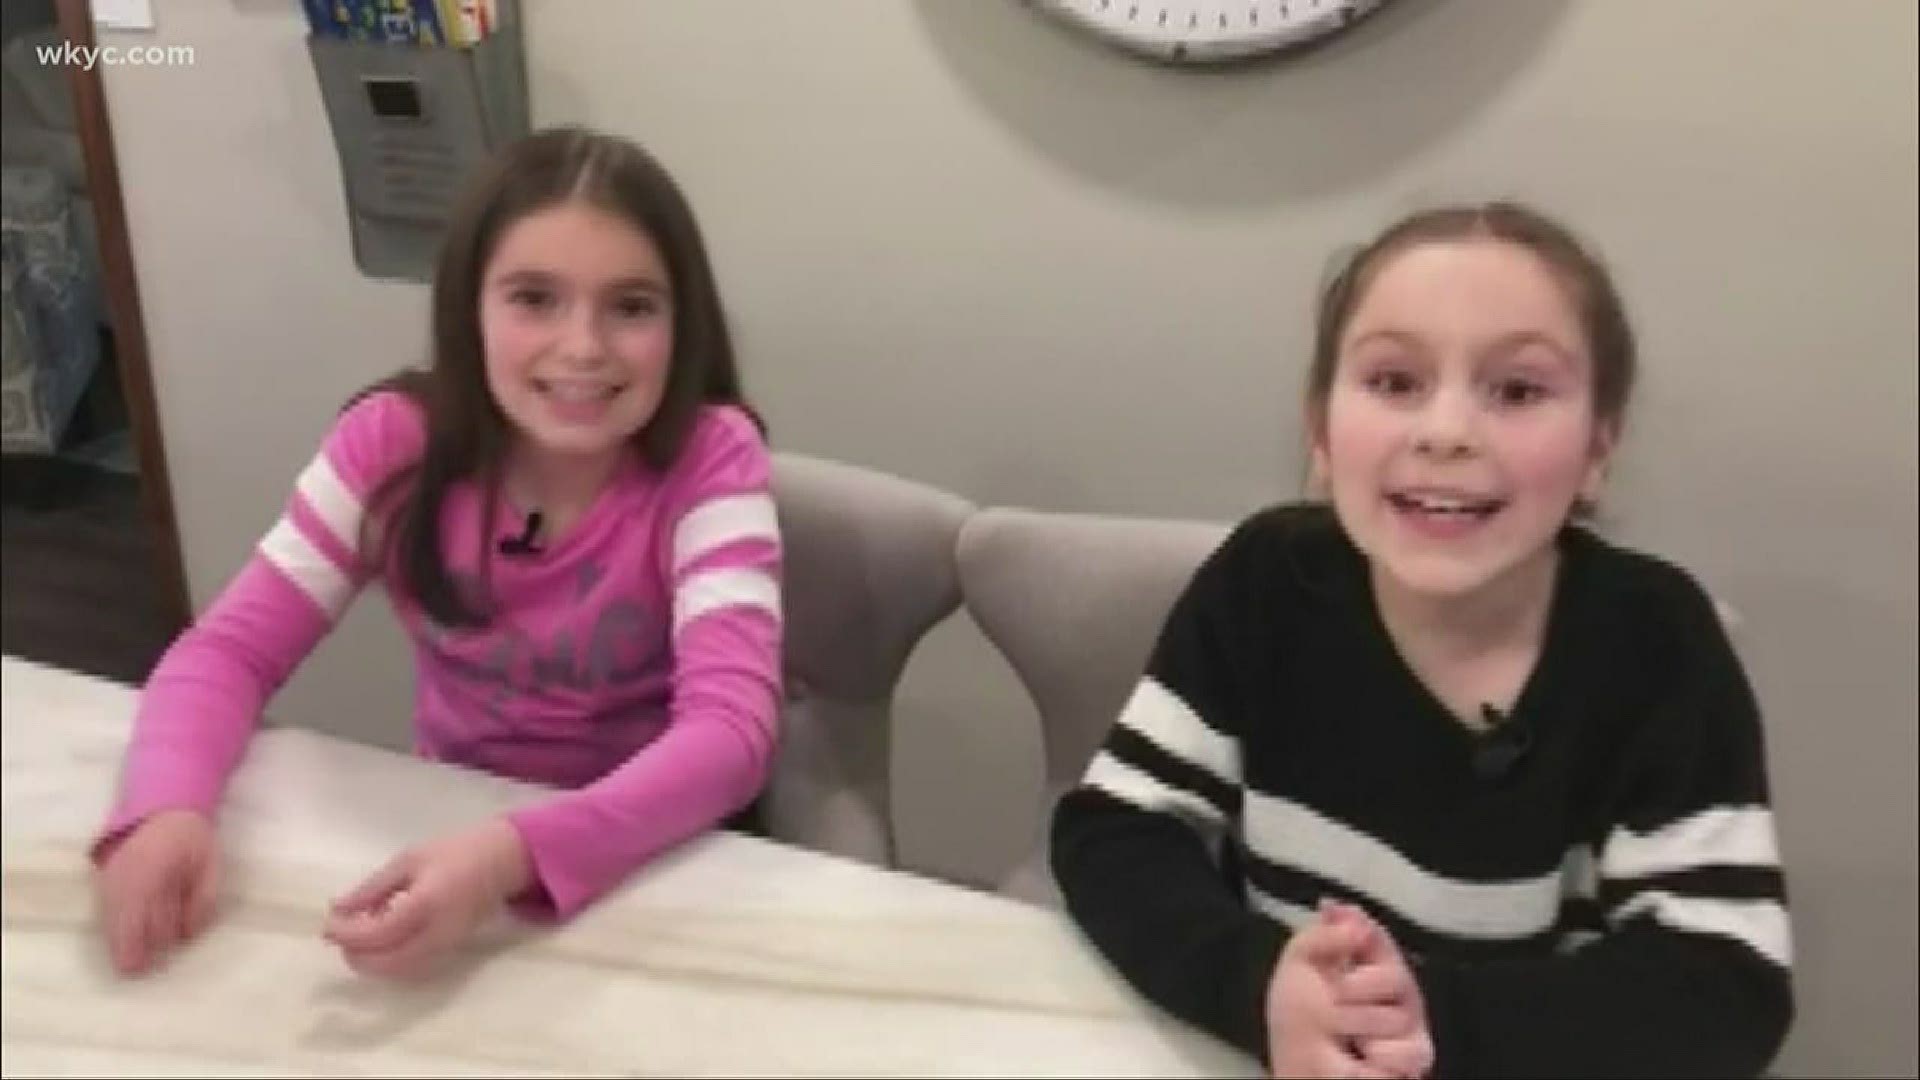 Bored at home? Dave Chudowsky's daughters share their favorite